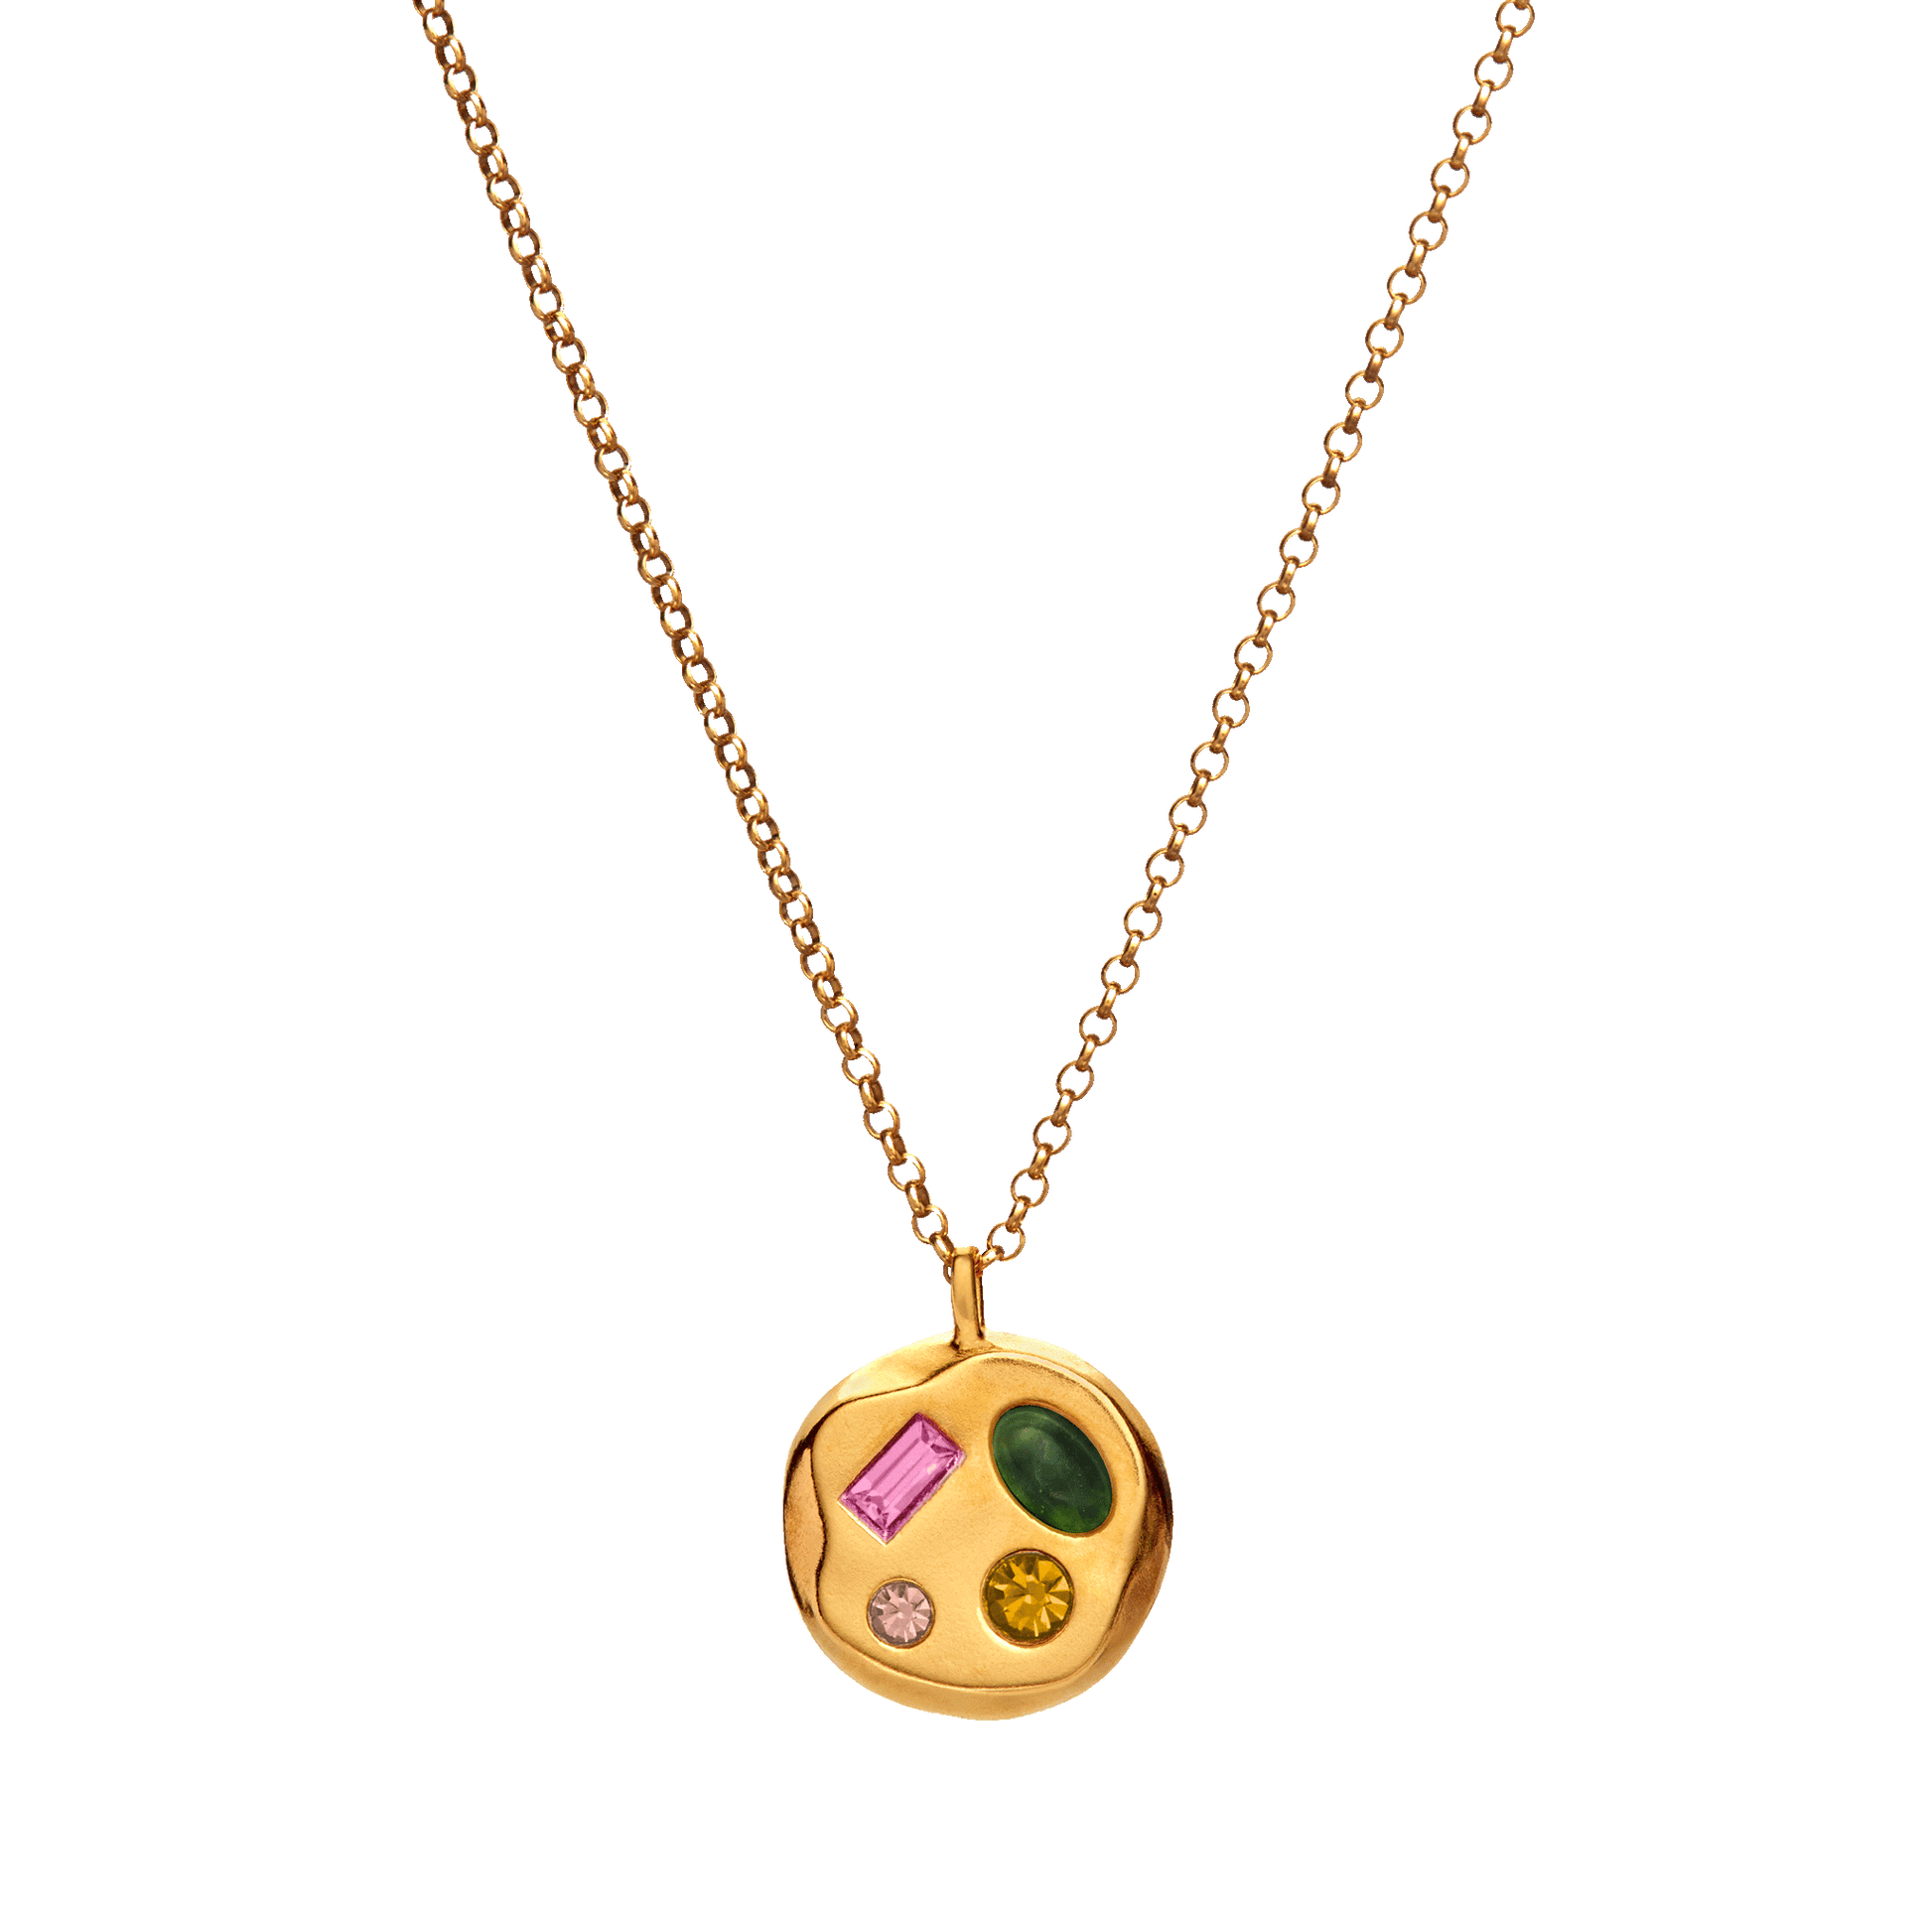 The October Sixth Pendant